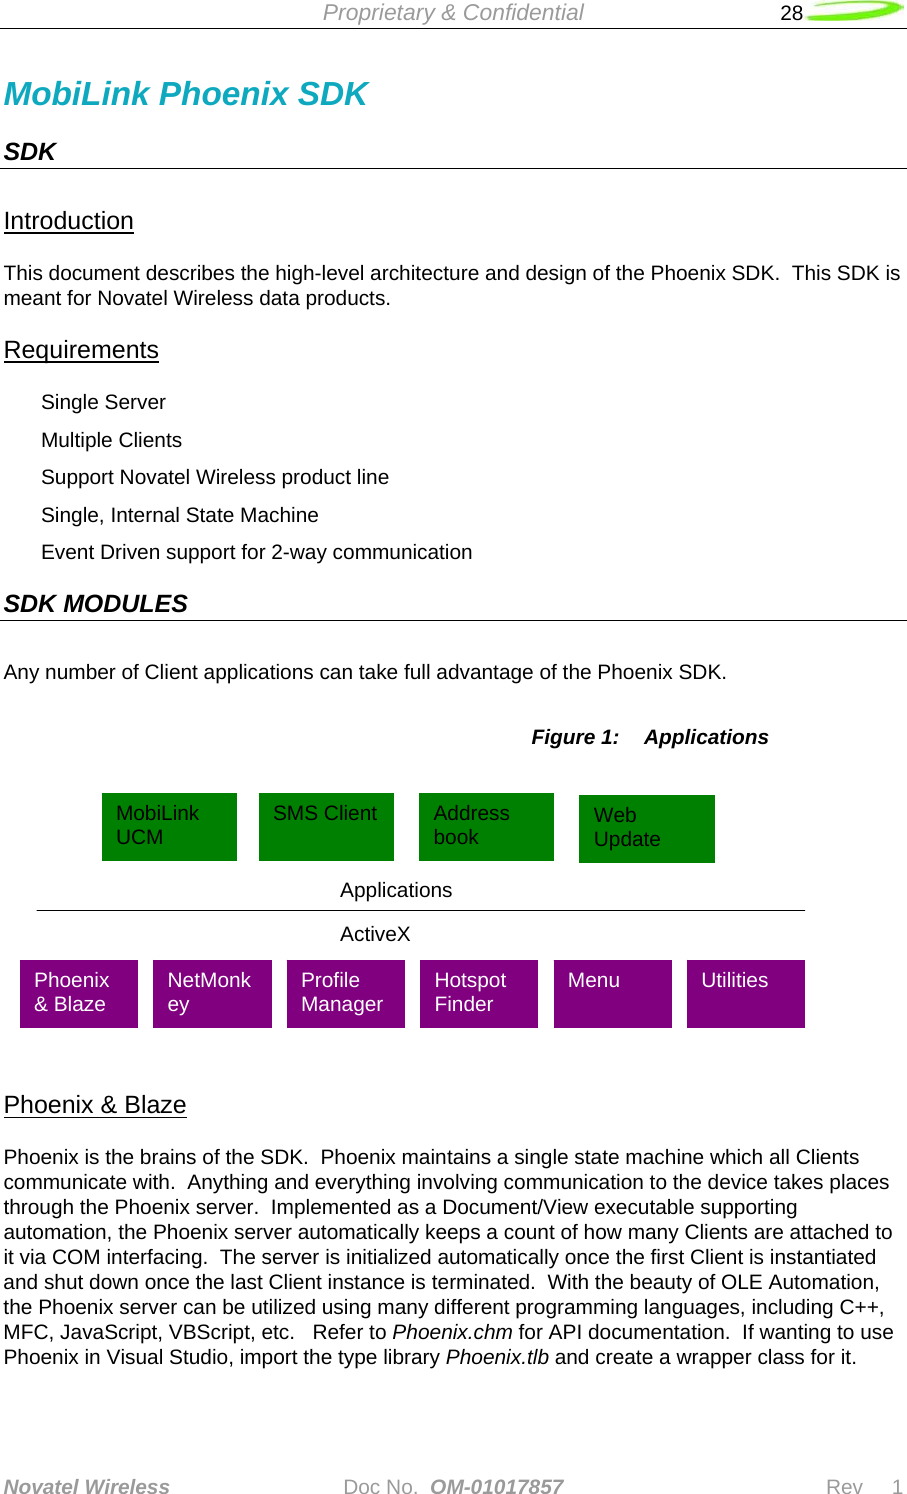  Proprietary &amp; Confidential   28   Novatel Wireless   Doc No.  OM-01017857                              Rev     1  MobiLink Phoenix SDK SDK  Introduction This document describes the high-level architecture and design of the Phoenix SDK.  This SDK is meant for Novatel Wireless data products. Requirements Single Server Multiple Clients Support Novatel Wireless product line Single, Internal State Machine Event Driven support for 2-way communication SDK MODULES Any number of Client applications can take full advantage of the Phoenix SDK.  Figure 1:  Applications   Phoenix &amp; Blaze Phoenix is the brains of the SDK.  Phoenix maintains a single state machine which all Clients communicate with.  Anything and everything involving communication to the device takes places through the Phoenix server.  Implemented as a Document/View executable supporting automation, the Phoenix server automatically keeps a count of how many Clients are attached to it via COM interfacing.  The server is initialized automatically once the first Client is instantiated and shut down once the last Client instance is terminated.  With the beauty of OLE Automation, the Phoenix server can be utilized using many different programming languages, including C++, MFC, JavaScript, VBScript, etc.   Refer to Phoenix.chm for API documentation.  If wanting to use Phoenix in Visual Studio, import the type library Phoenix.tlb and create a wrapper class for it.  Applications ActiveX MobiLink UCM  SMS Client  Address book  Web Update Profile Manager  Hotspot Finder  Menu  Utilities  NetMonkey Phoenix &amp; Blaze 